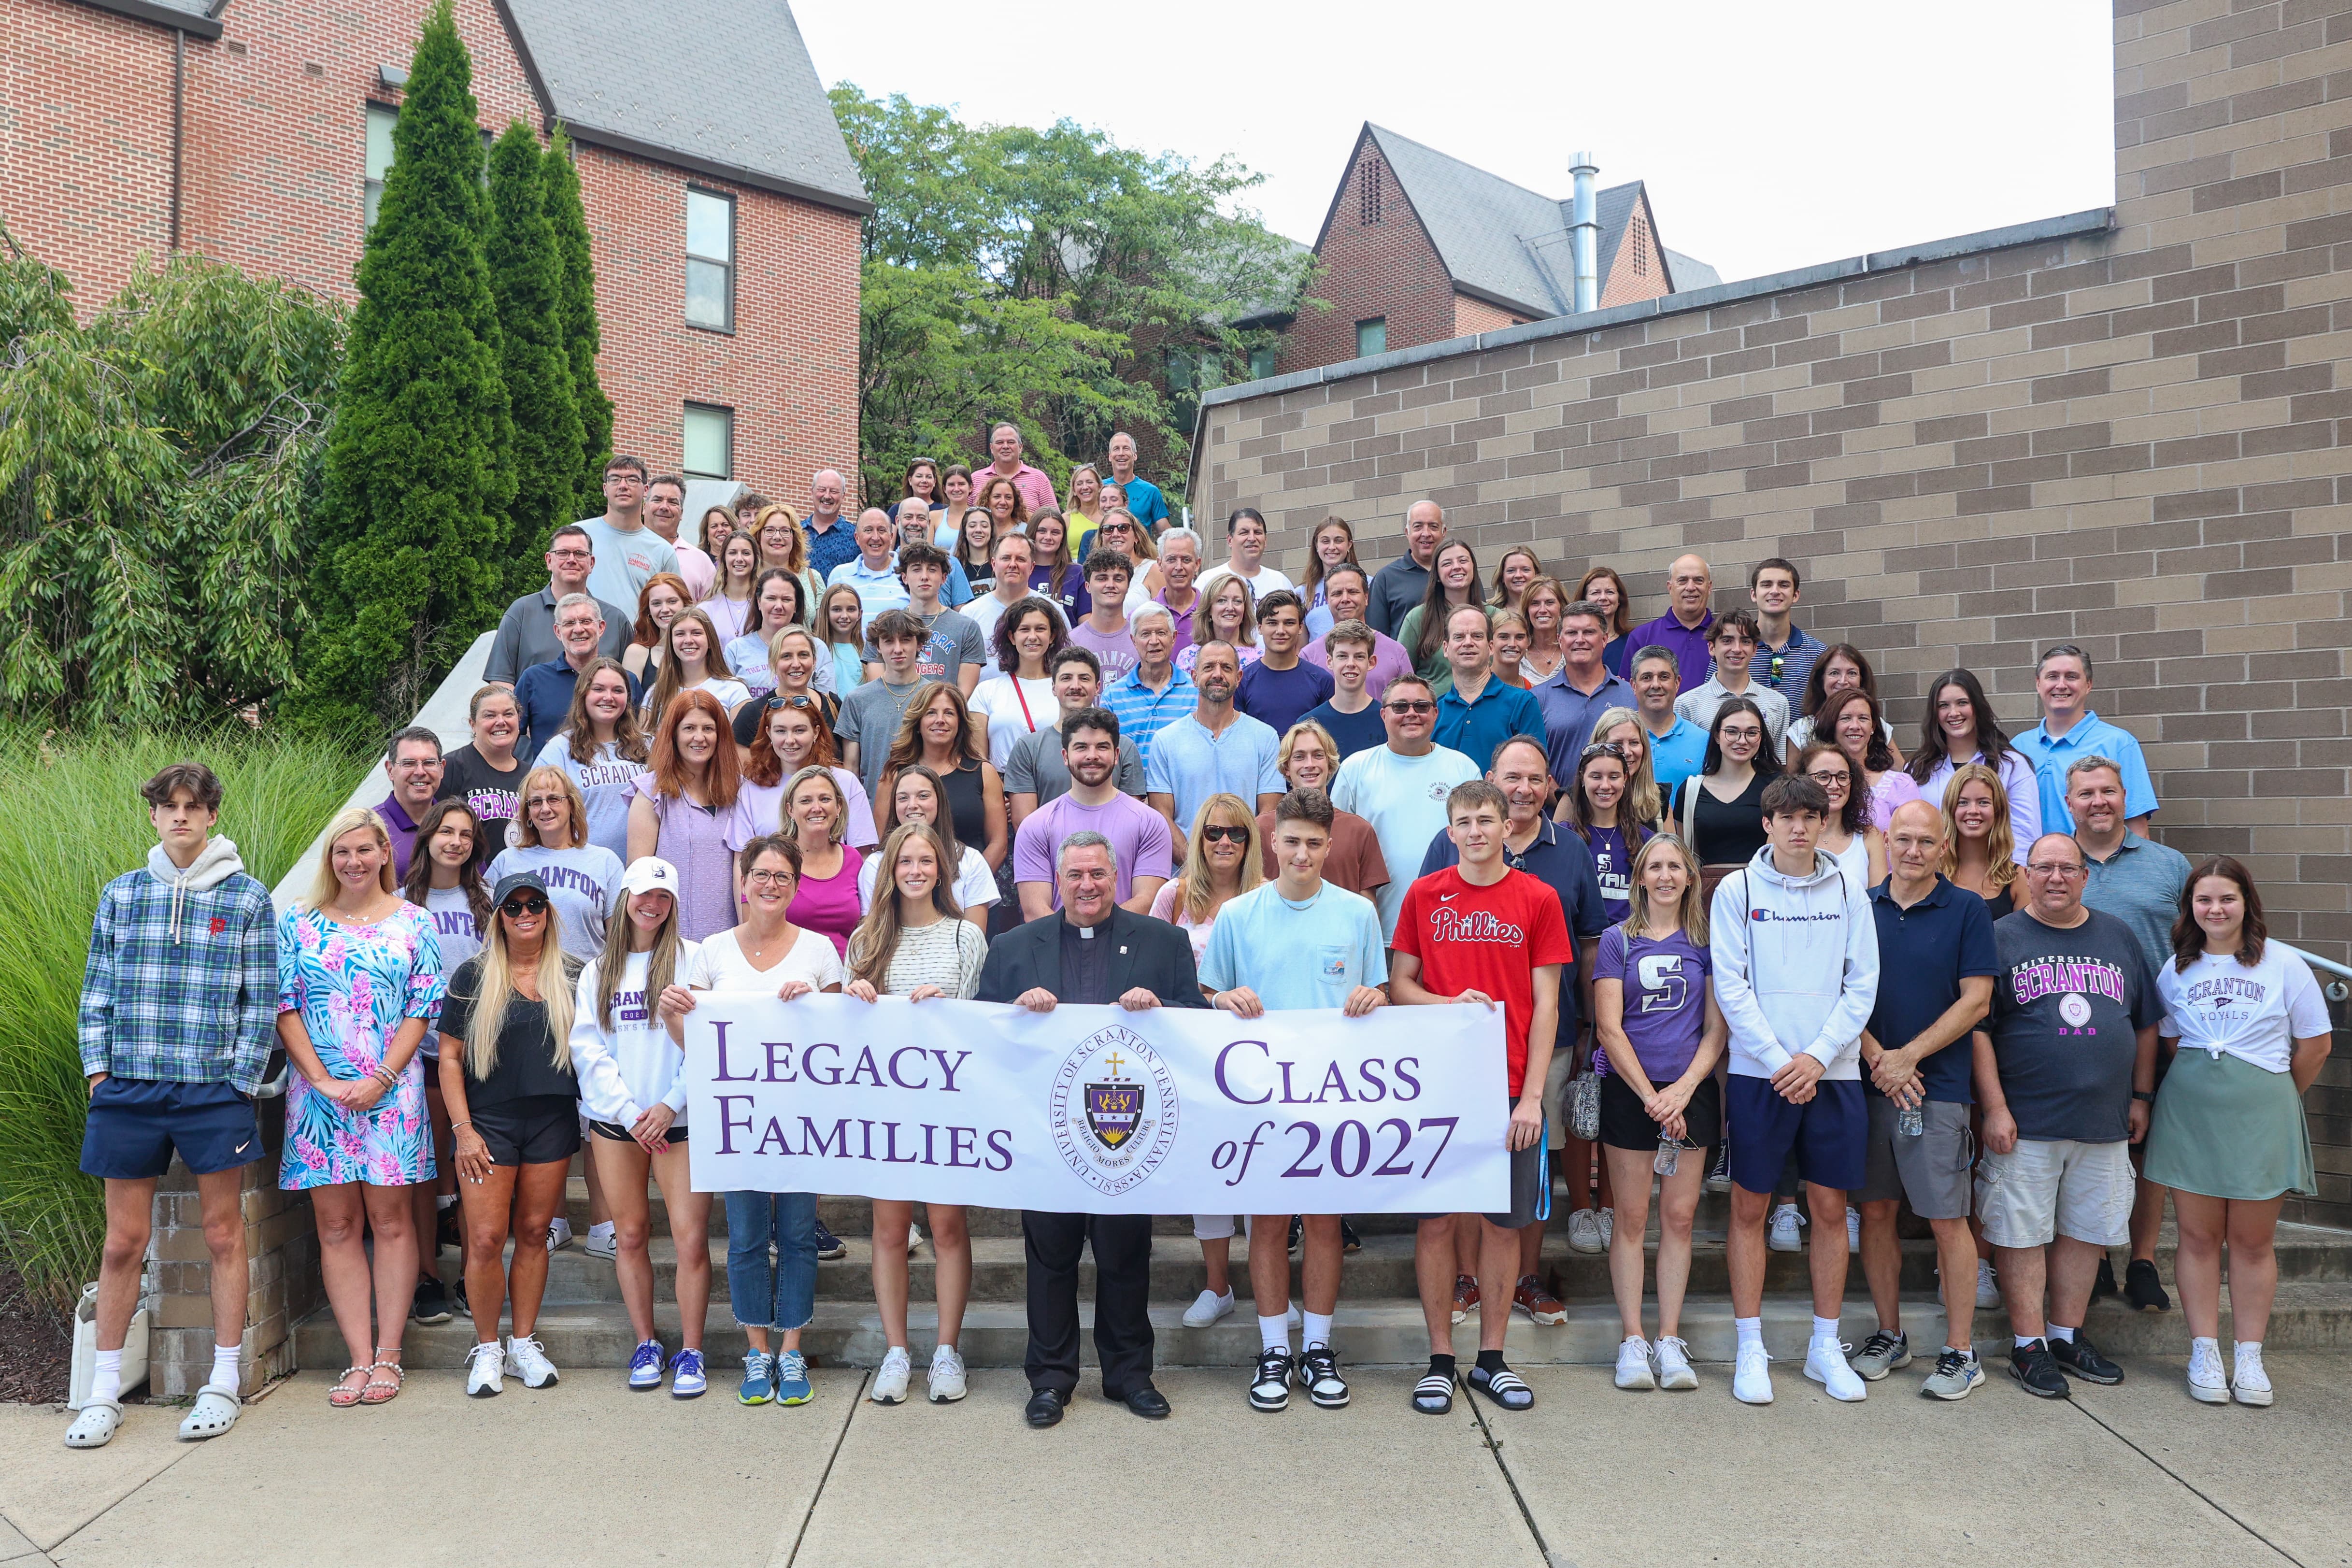 University Holds Class of 2027 Legacy Families Reception